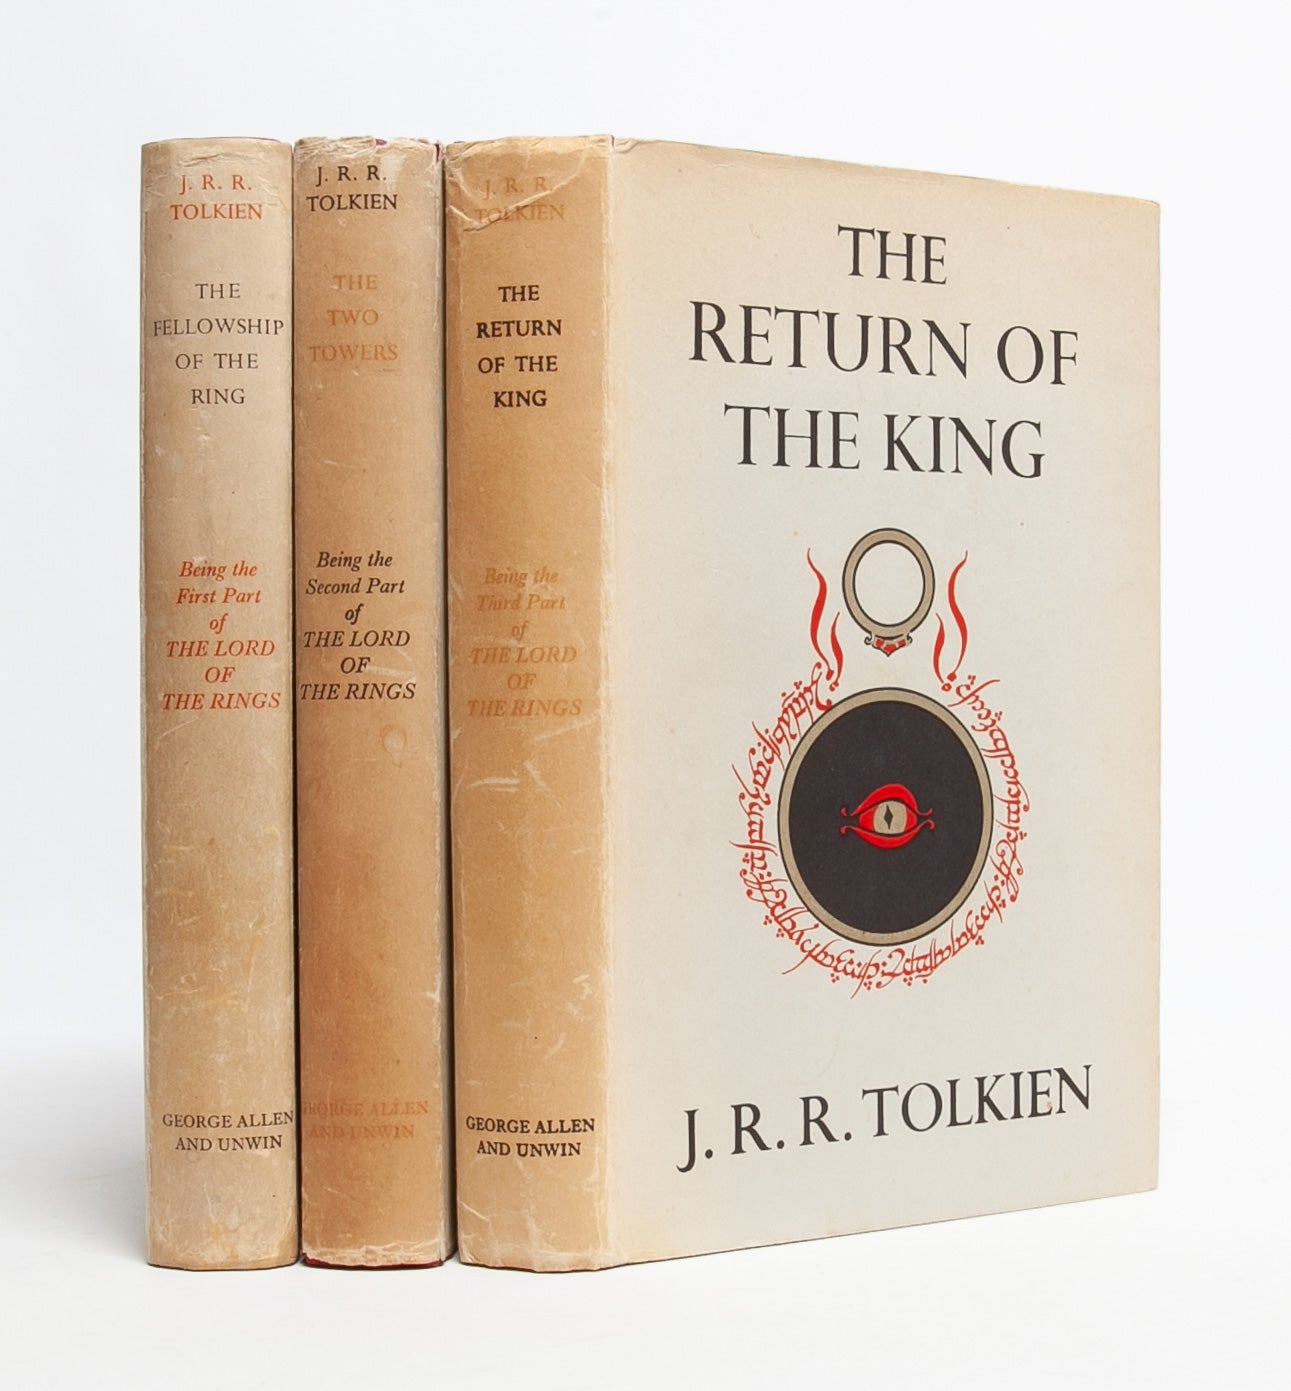 The Lord of the Rings Trilogy, comprised of: The Fellowship of the Ring;  The Two Towers and The Return of the King by J. R. R. Tolkien on Whitmore  